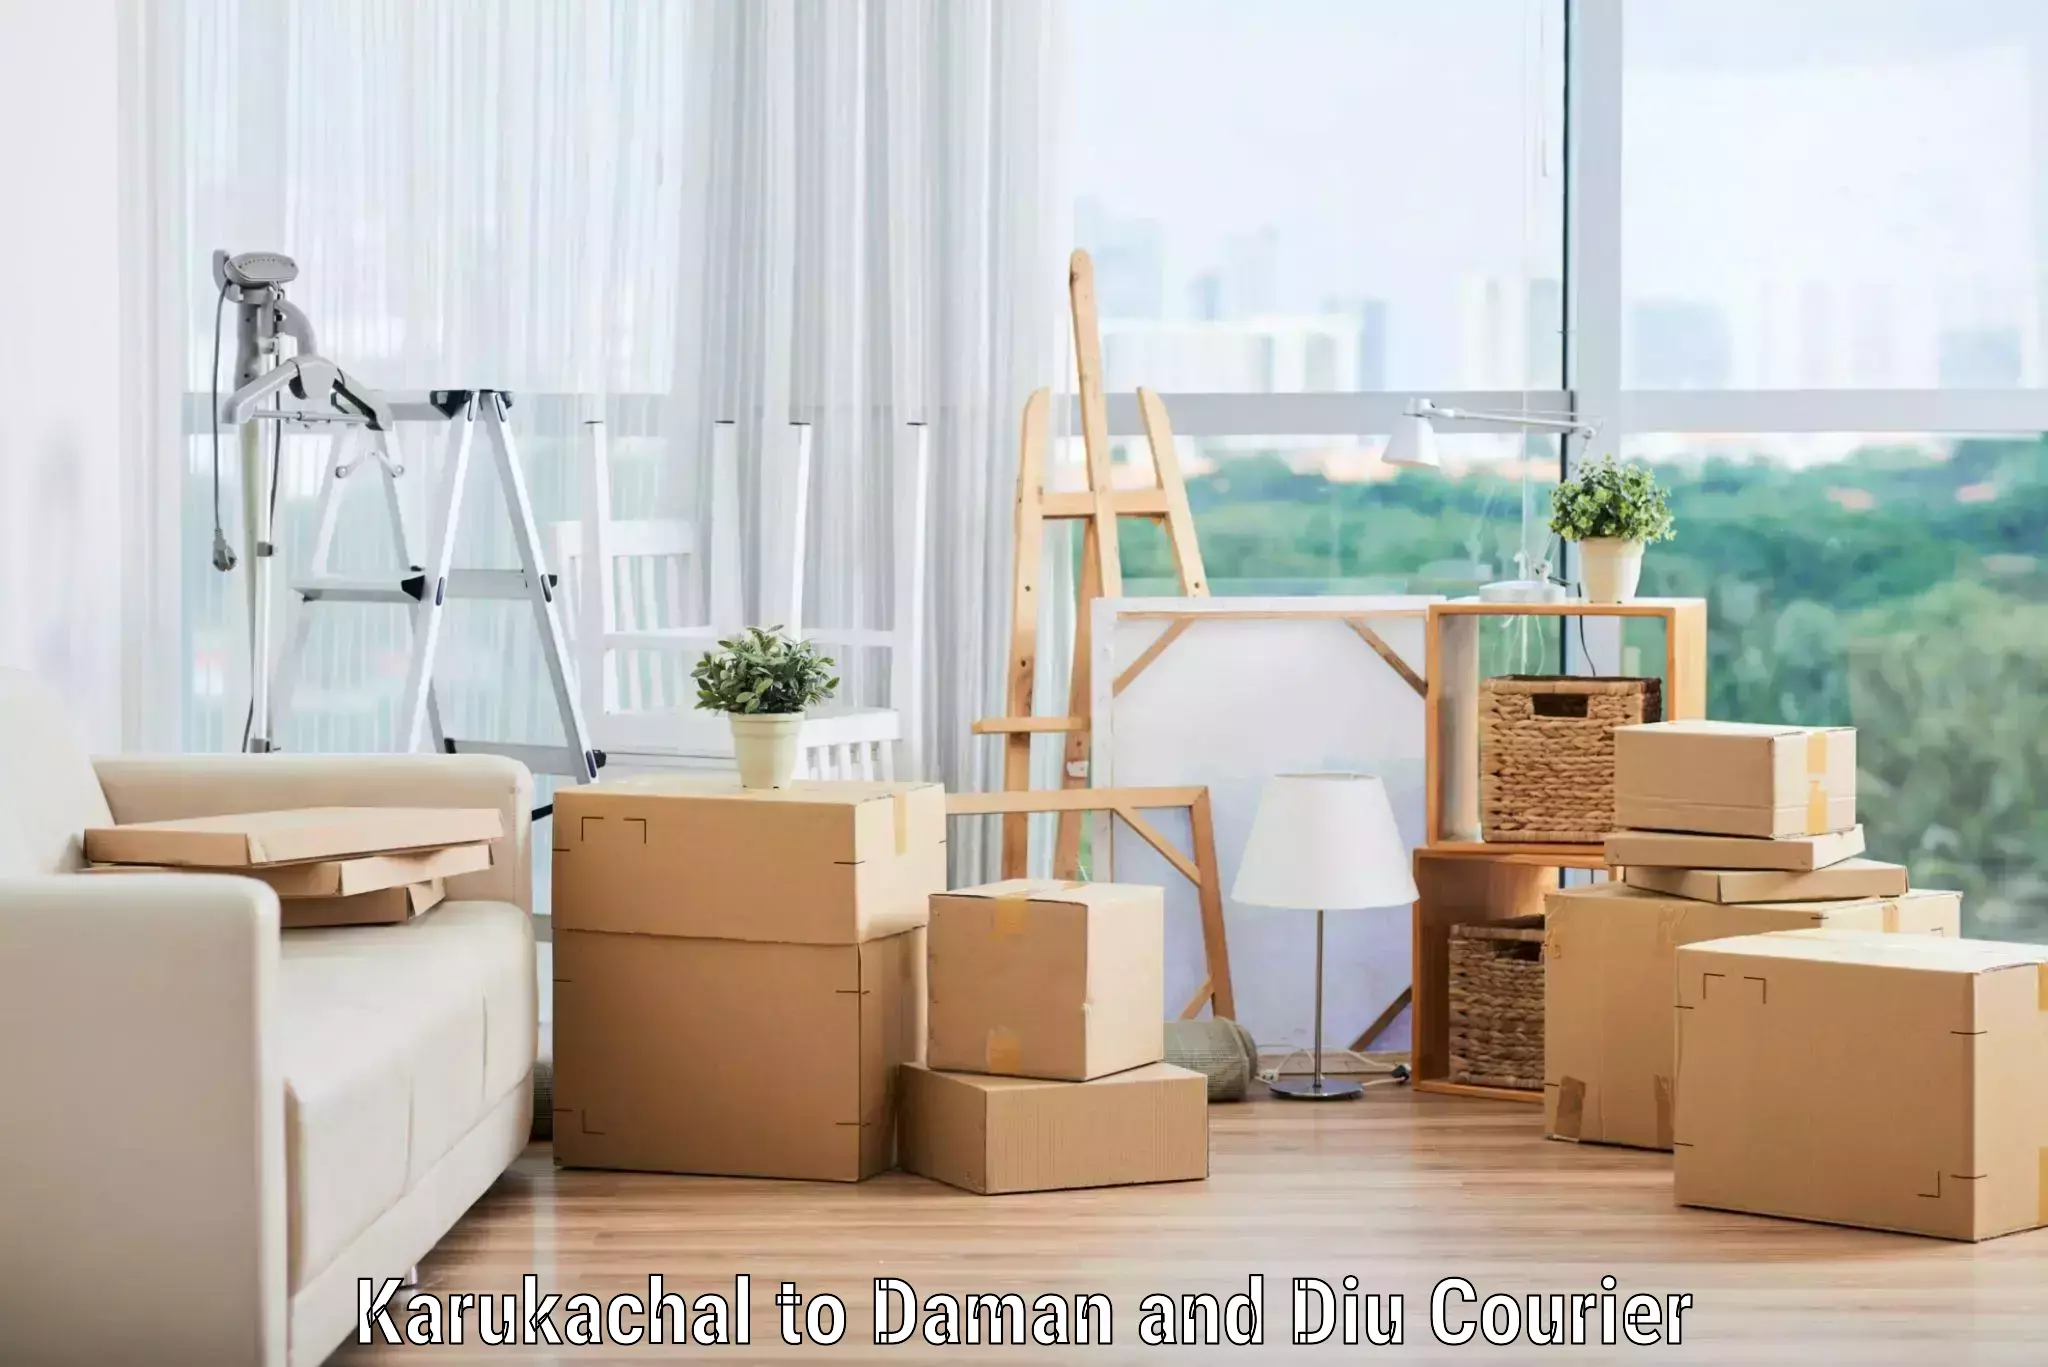 Trusted relocation experts Karukachal to Daman and Diu